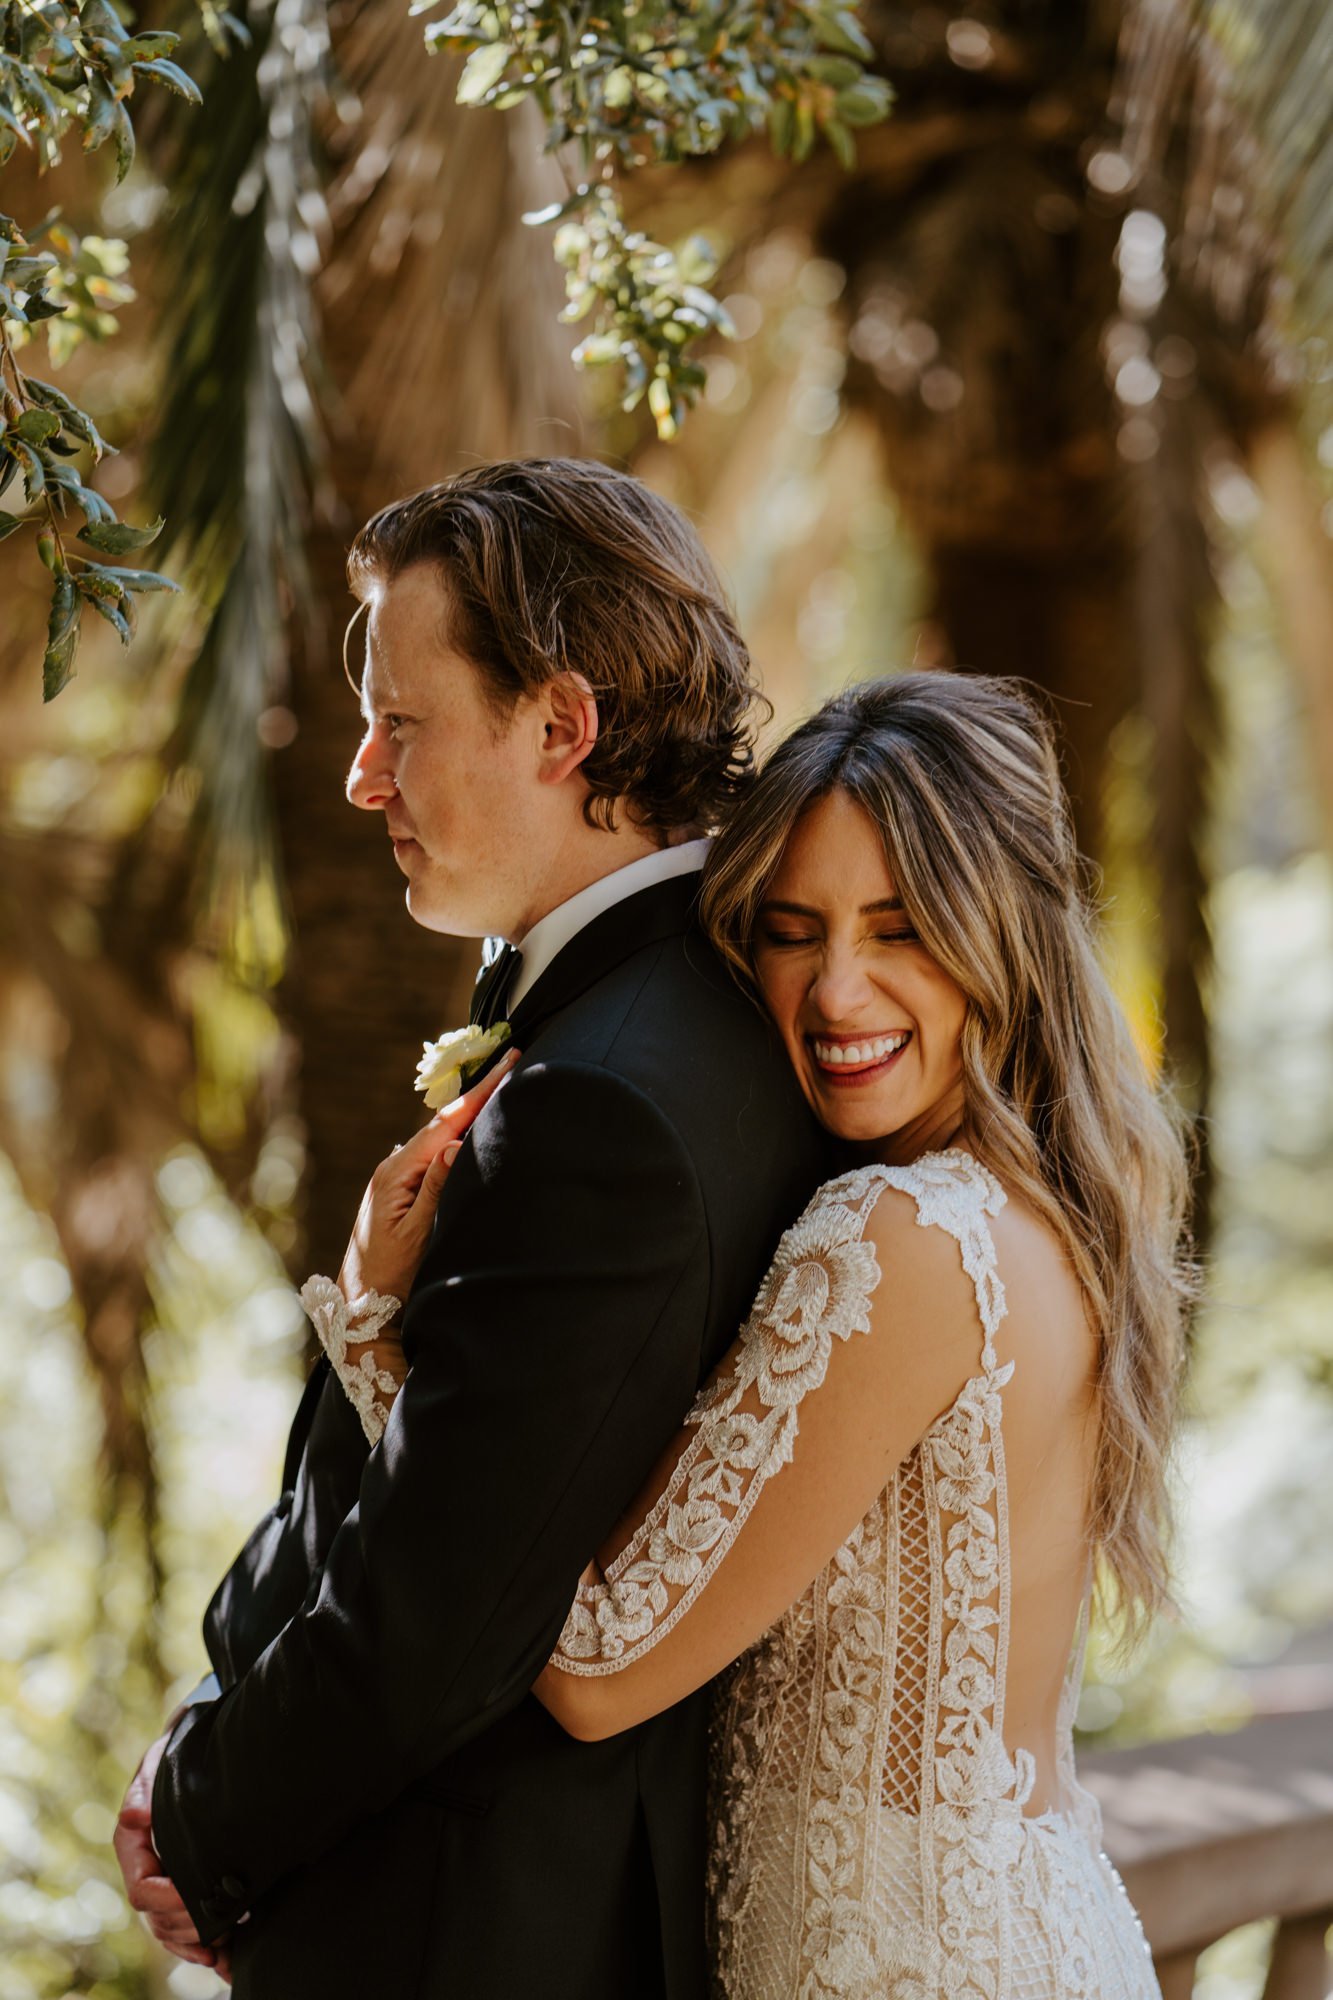 Bride and groom portrait at The Houdini Estate wedding in los angeles, ca. Vibrant and candid los angeles wedding photography by Tida Svy